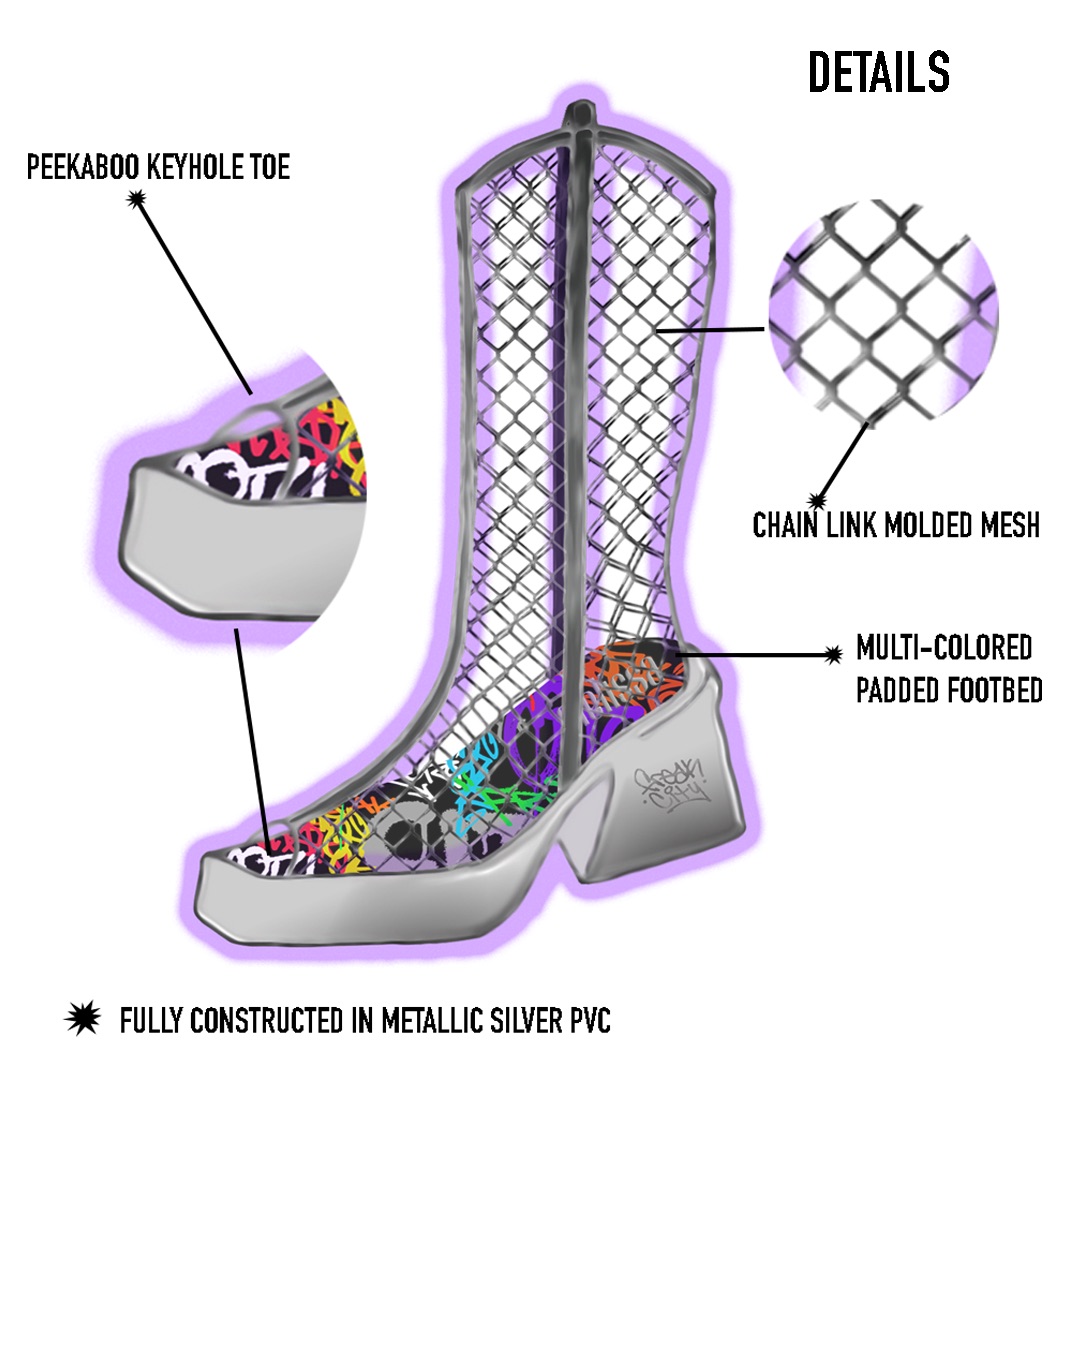 DETAILS

 
 
 
  
      

N\
Z

PEEKABOO KEYHOLE TOE

Davey
KK
LL

)

   
 
  

 

(2
a

   
 
 

or
CQ

CH NY
LHX:

CX

     
   
 

  
 

x
»

   

CHAIN LINK MOLDED MESH

C

 

4

(RK
K 4

=
5X5

9

   

X
5,
KO

   

5
2;
4

3 FULLY CONSTRUCTED IN METALLIC SILVER PVC

MULTI-COLORED
PADDED FOOTBED